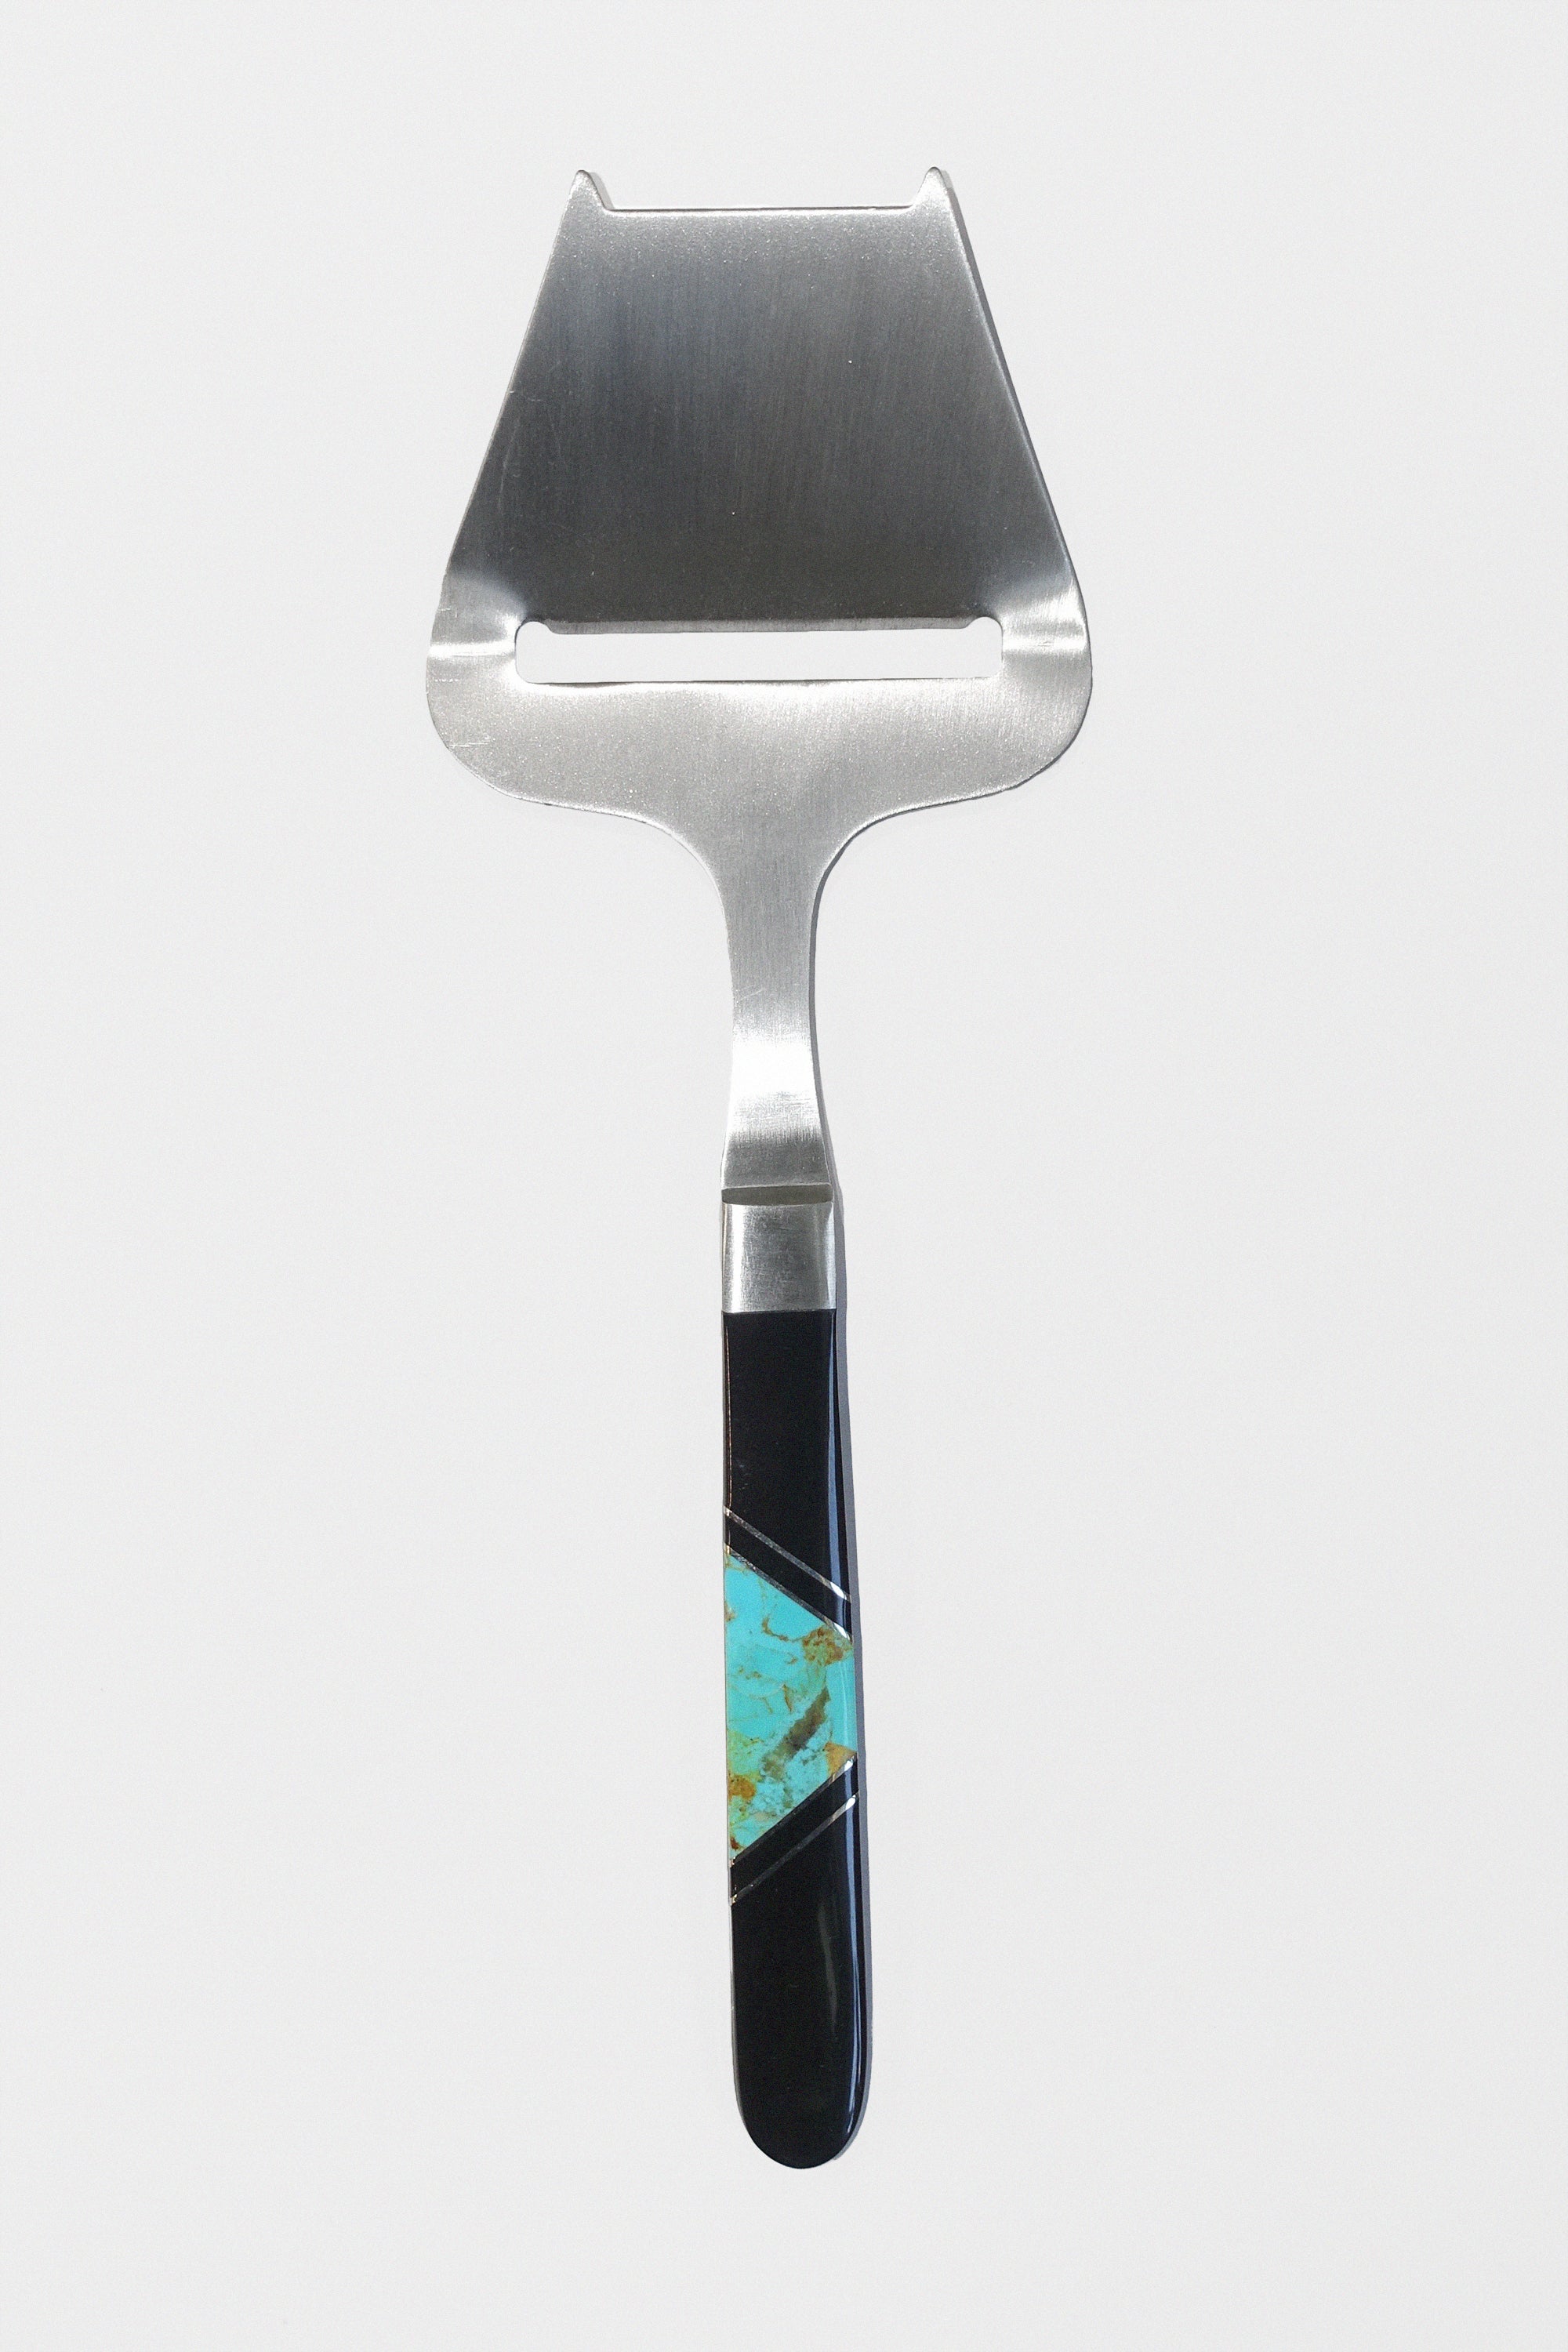 Cheese Slicer in Turquoise & Jet by Santa Fe Stoneworks